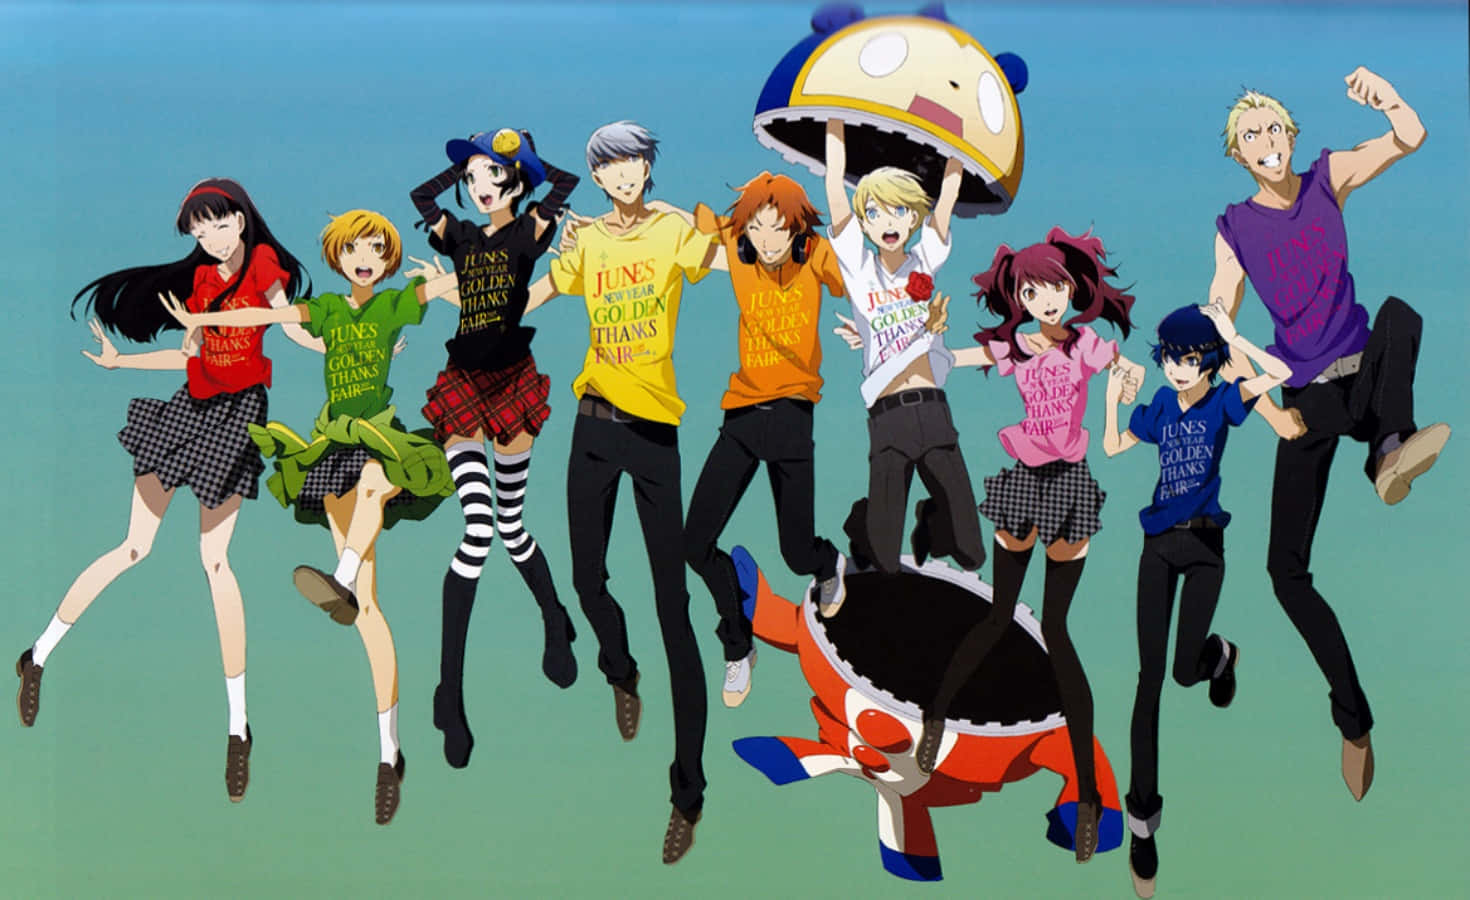 "Experience the out-of-this-world adventure of Persona 4!"